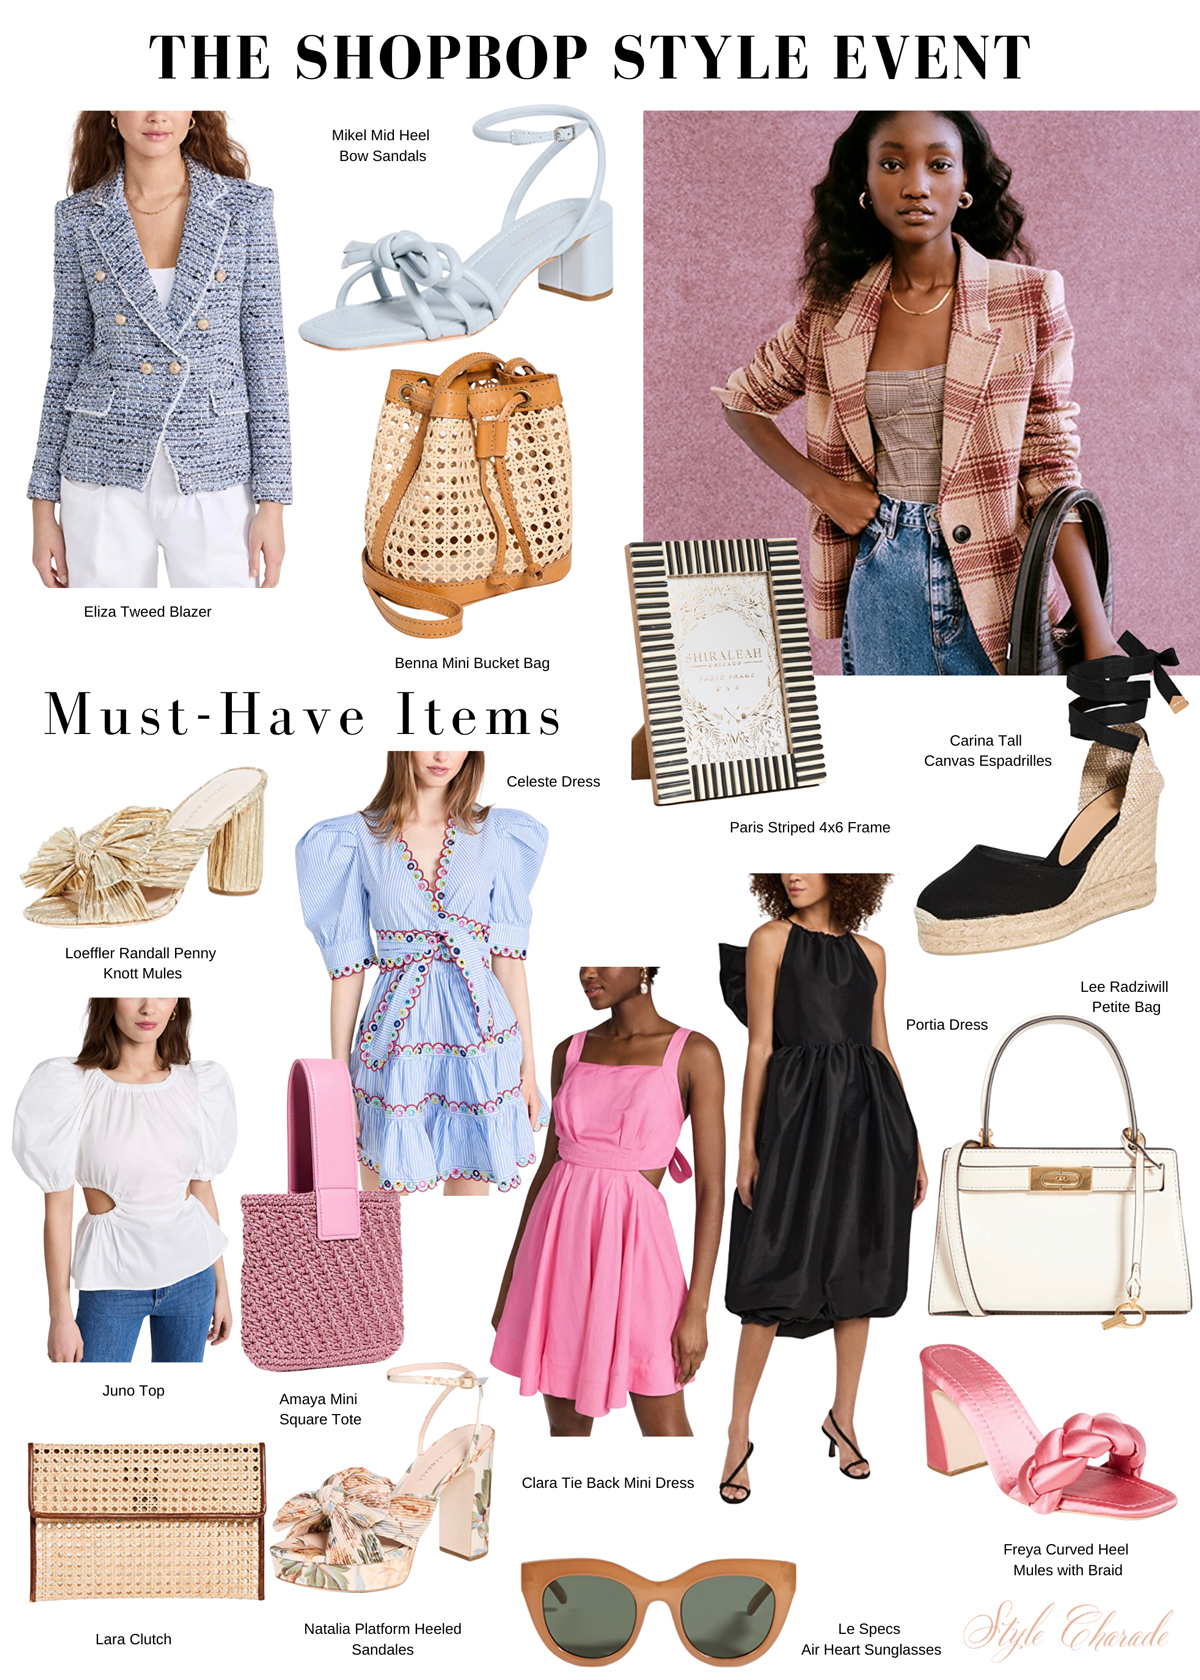 Shopbop Sale | Best Shopbop Styles on Sale | Spring Style Event